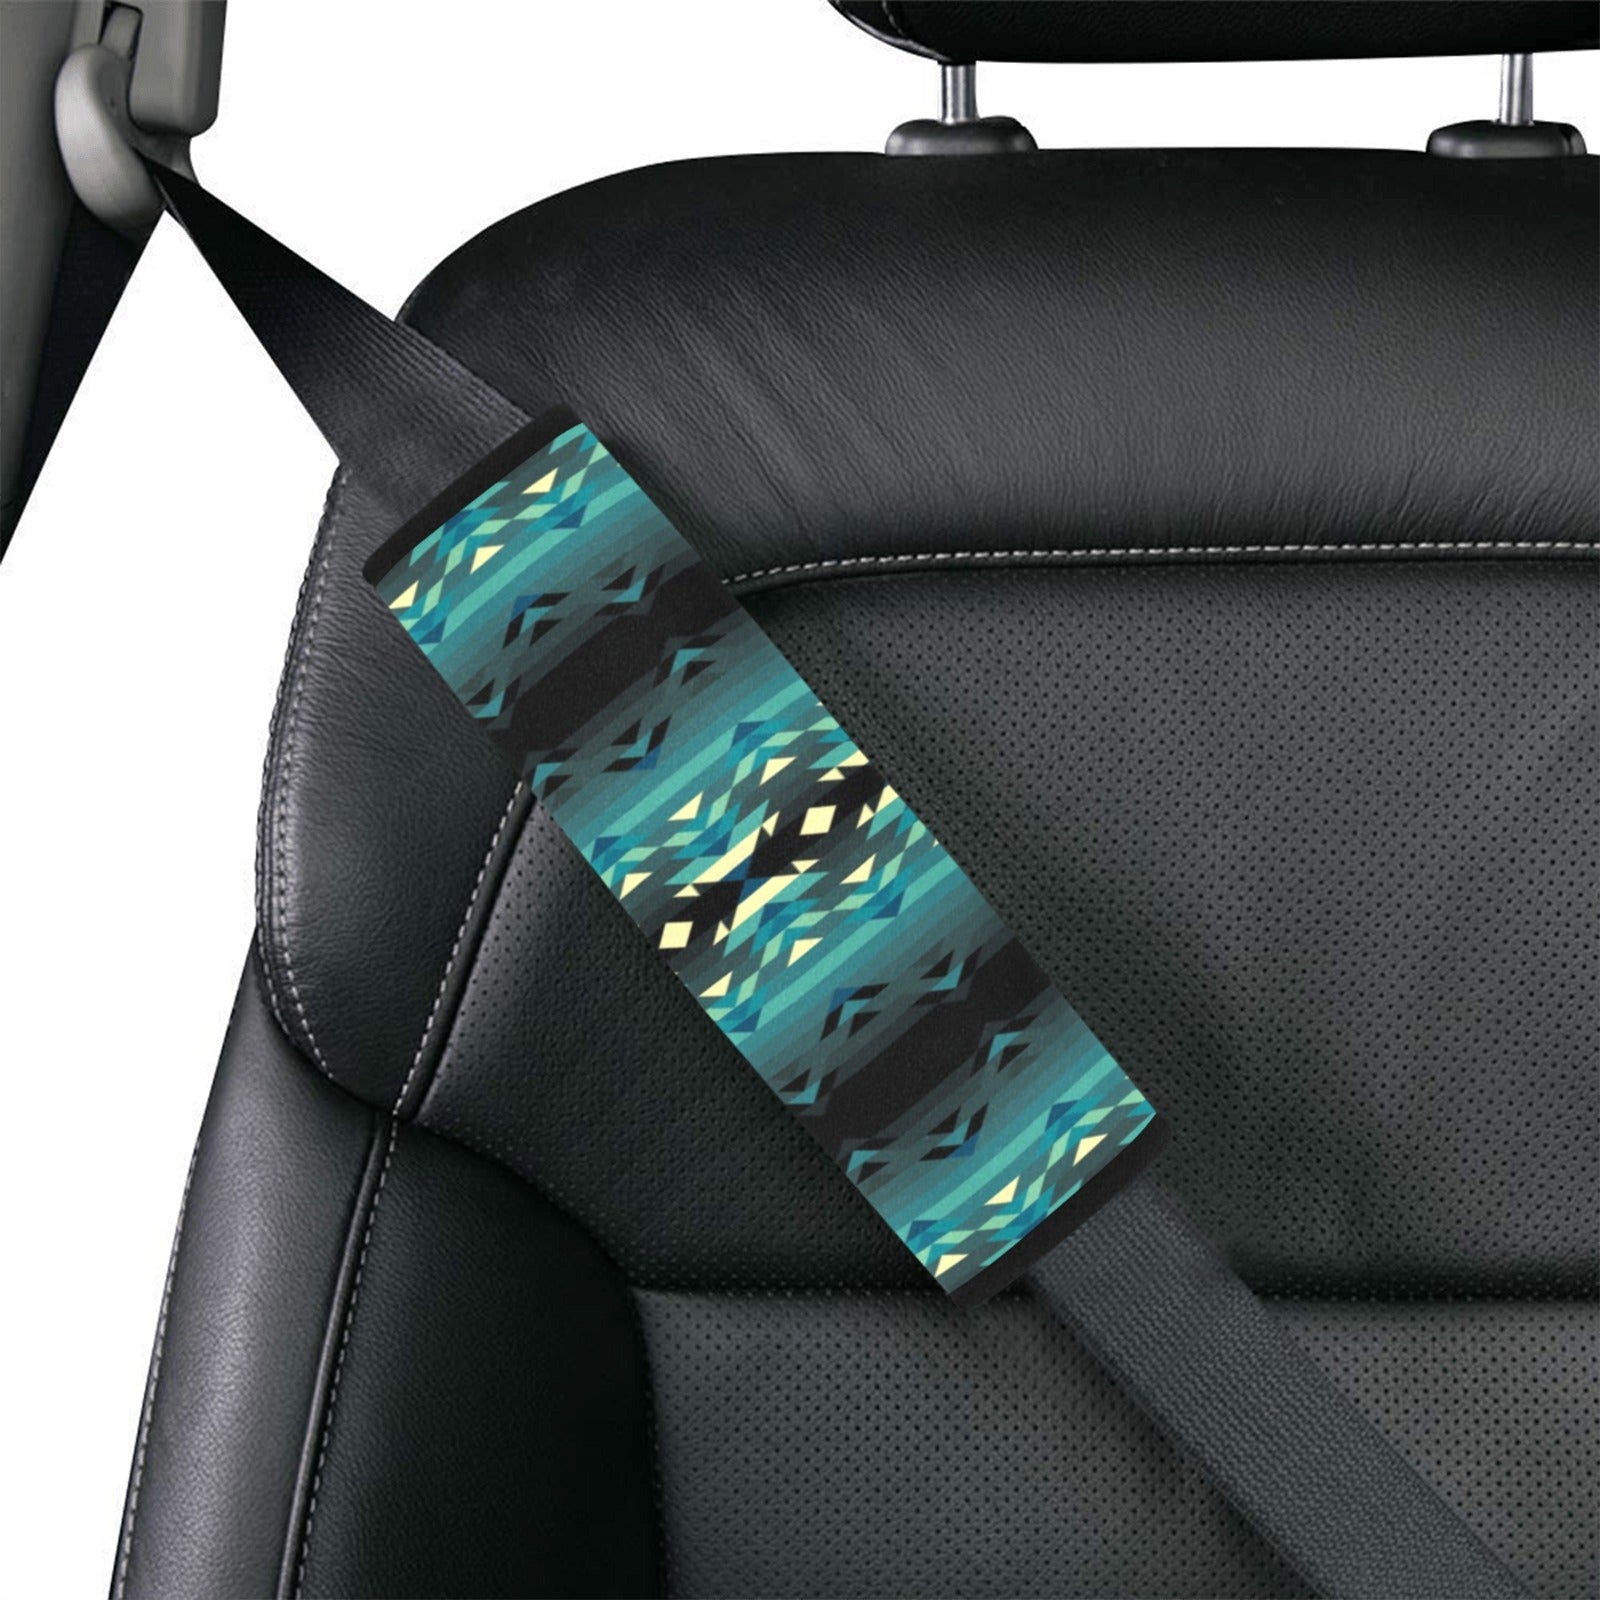 Inspire Green Car Seat Belt Cover 7''x12.6'' (Pack of 2) Car Seat Belt Cover 7x12.6 (Pack of 2) e-joyer 